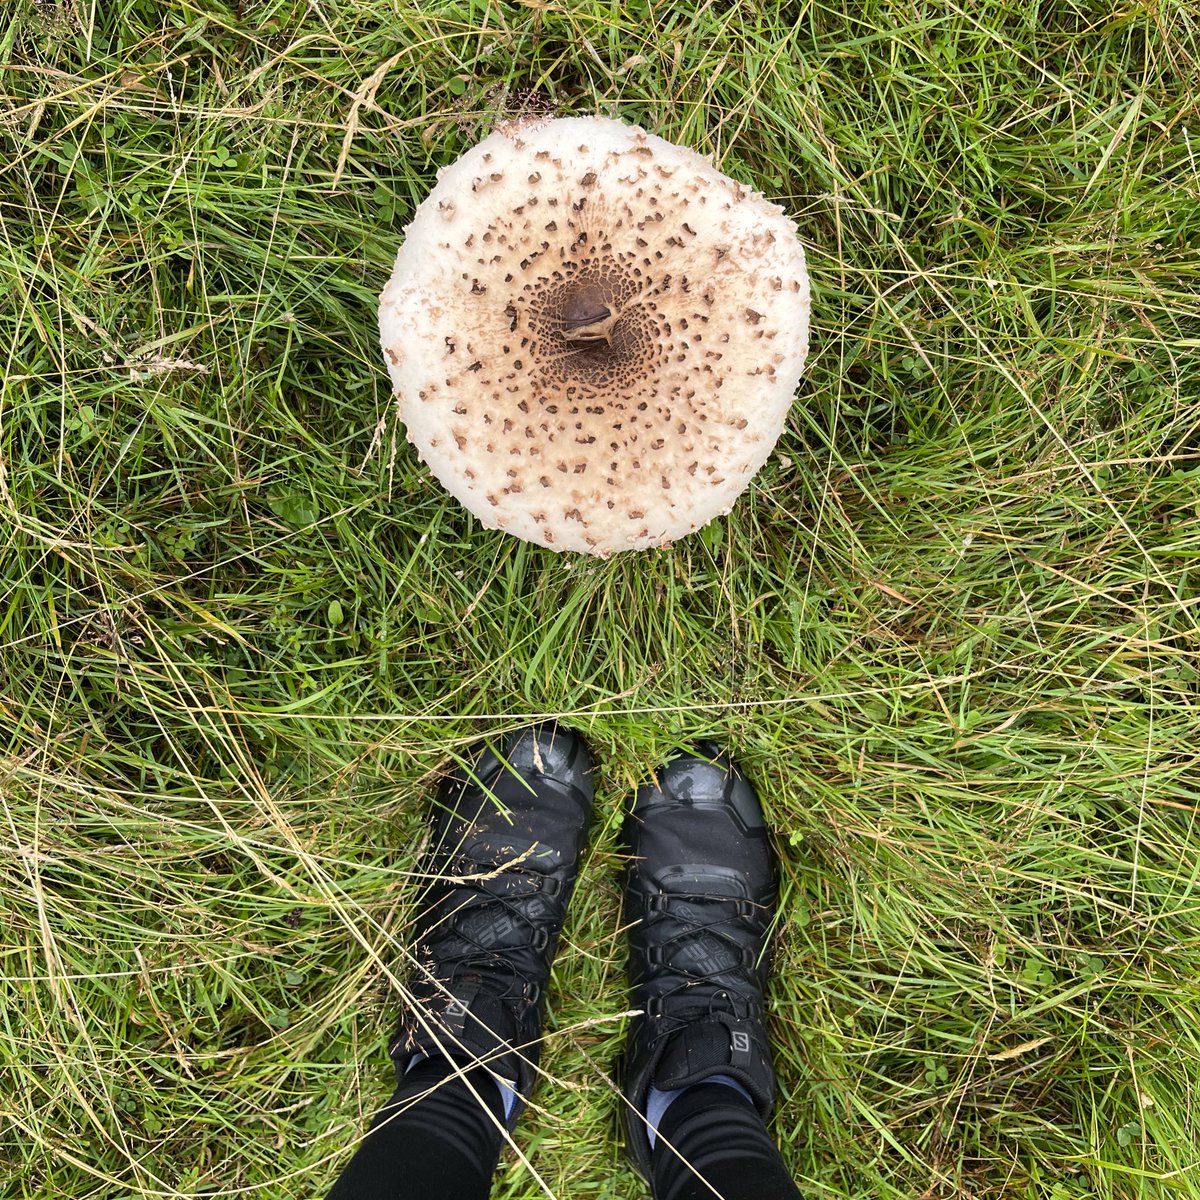 Rain Lovers A damp summer means #Fungi finding has started! Many huge parasol mushrooms popping up in the fields along with a perfect common puffball. Looking forward to #Autumn for further finds. #Nature #NaturePhotography @BritMycolSoc